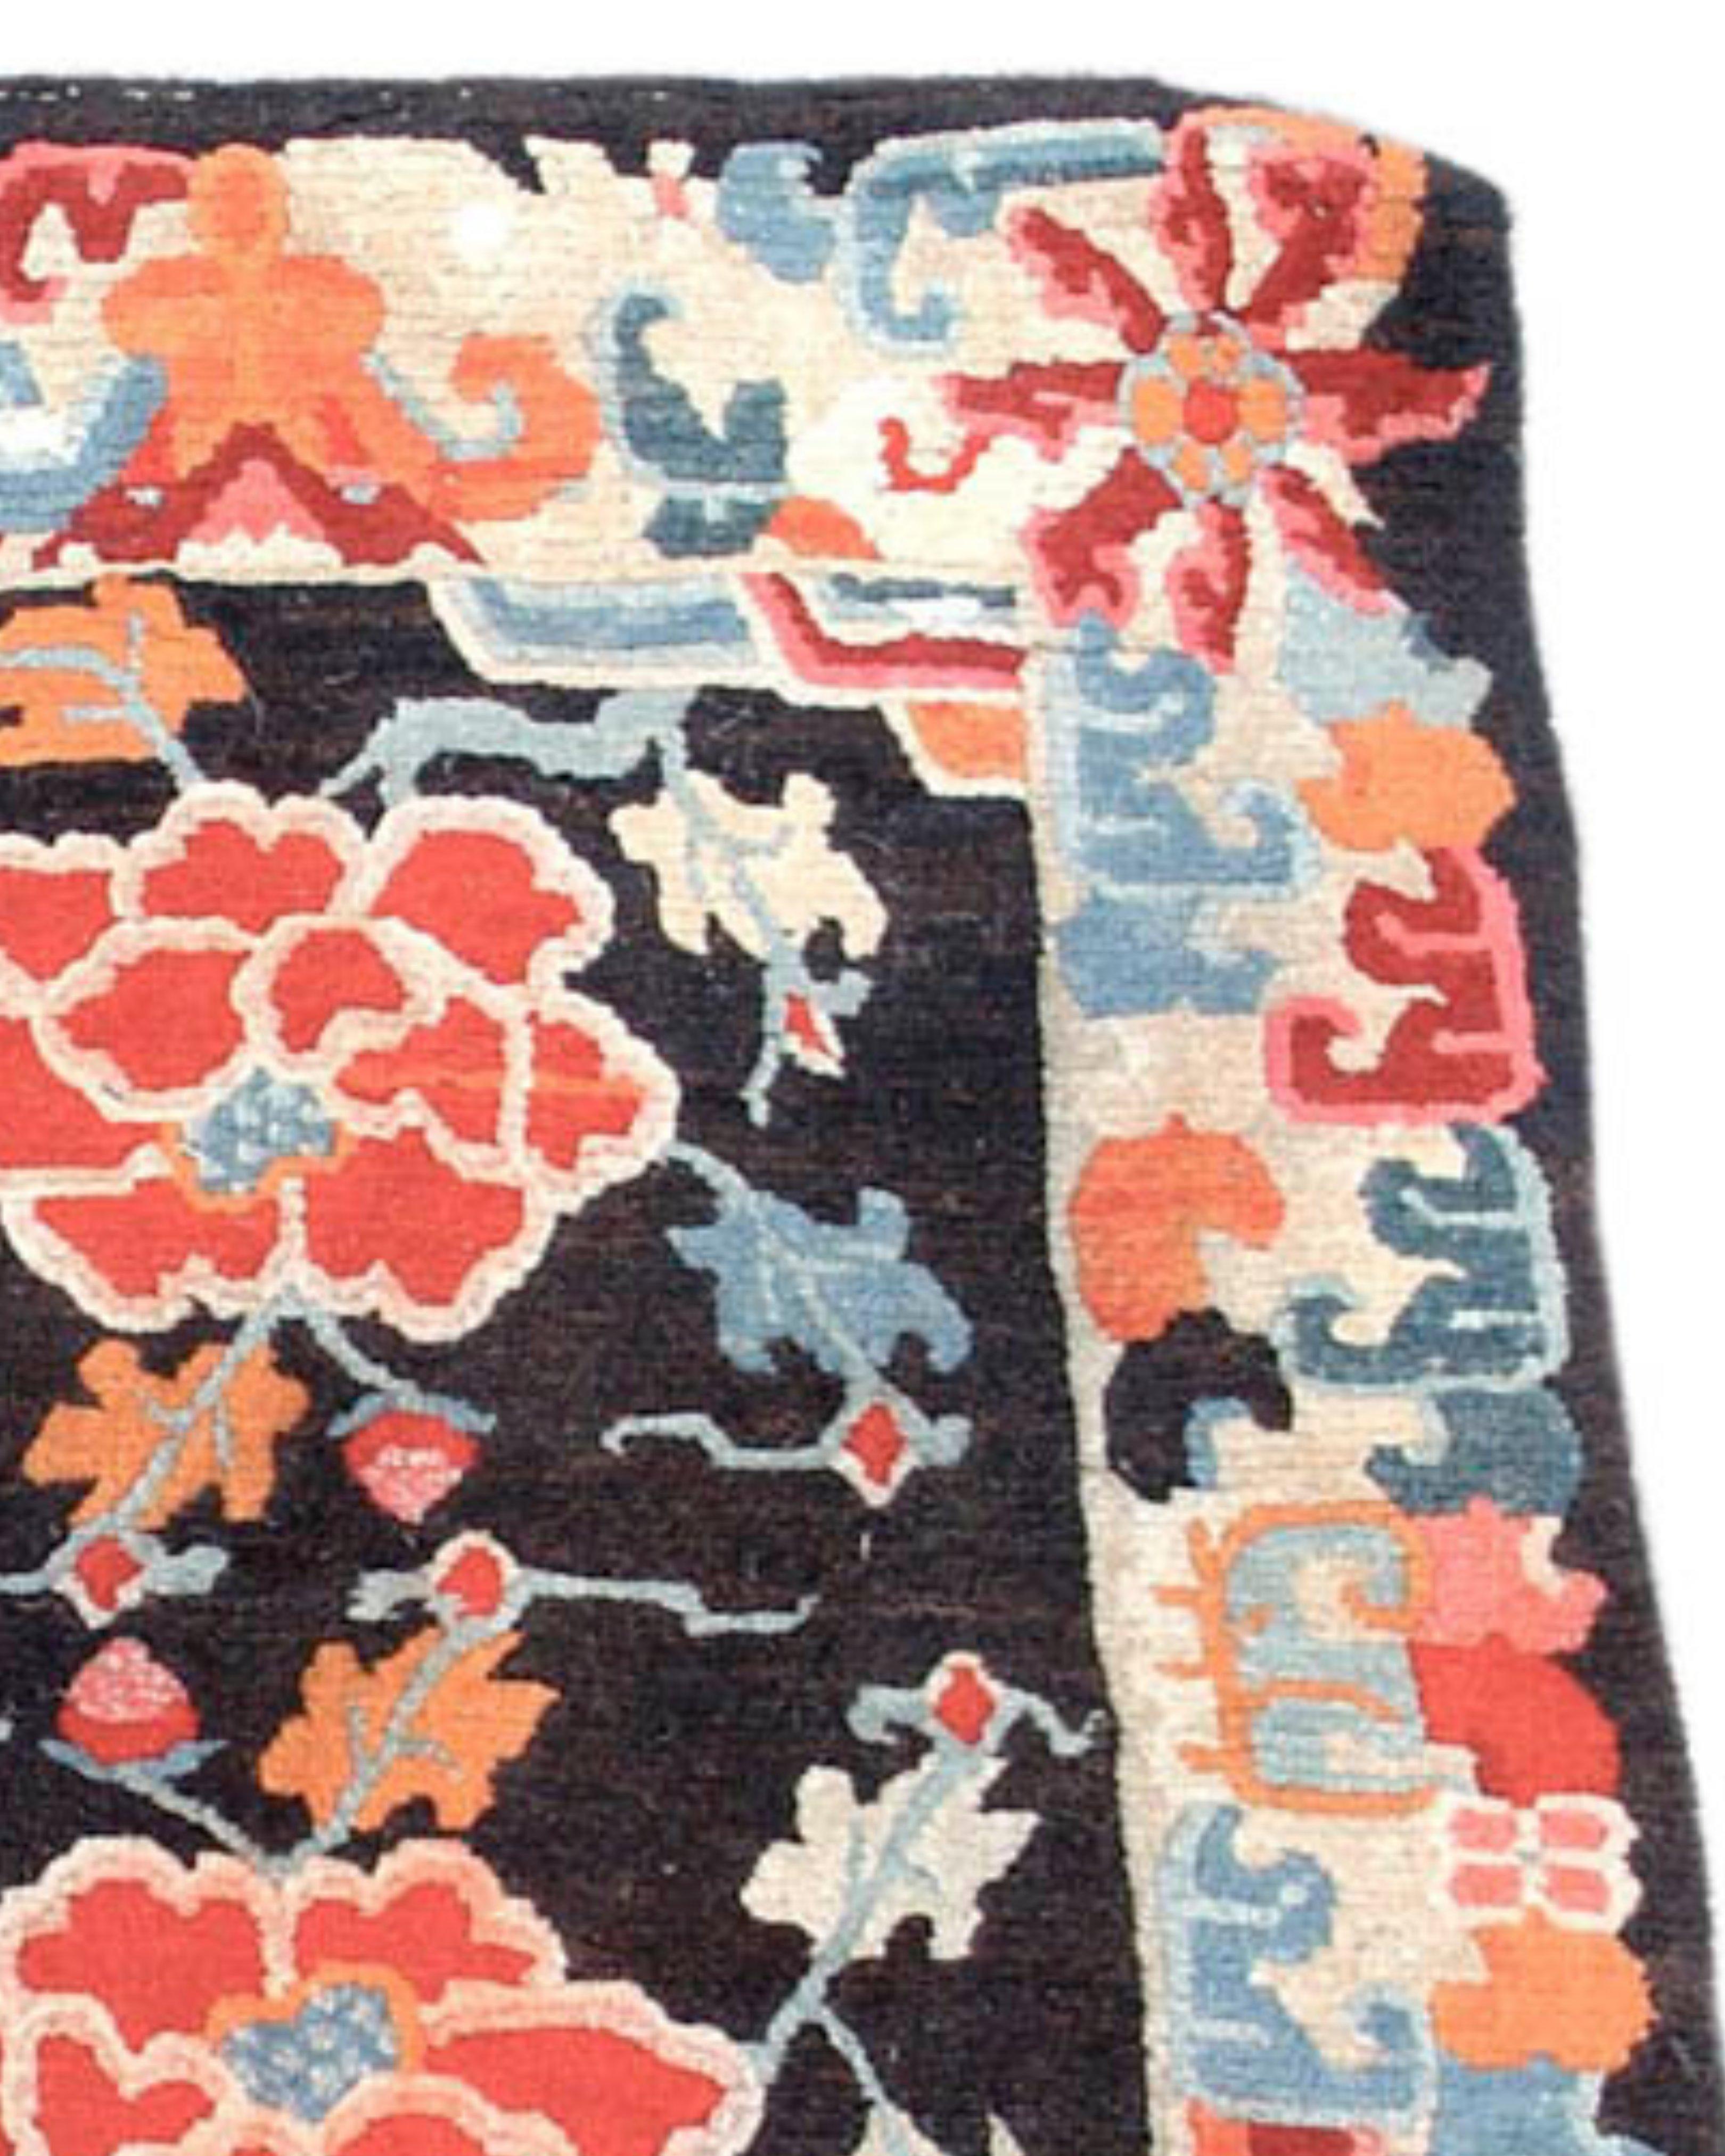 Tibetan Saddle Seat Rug, Early 20th Century

Additional Information:
Dimensions: 2'0